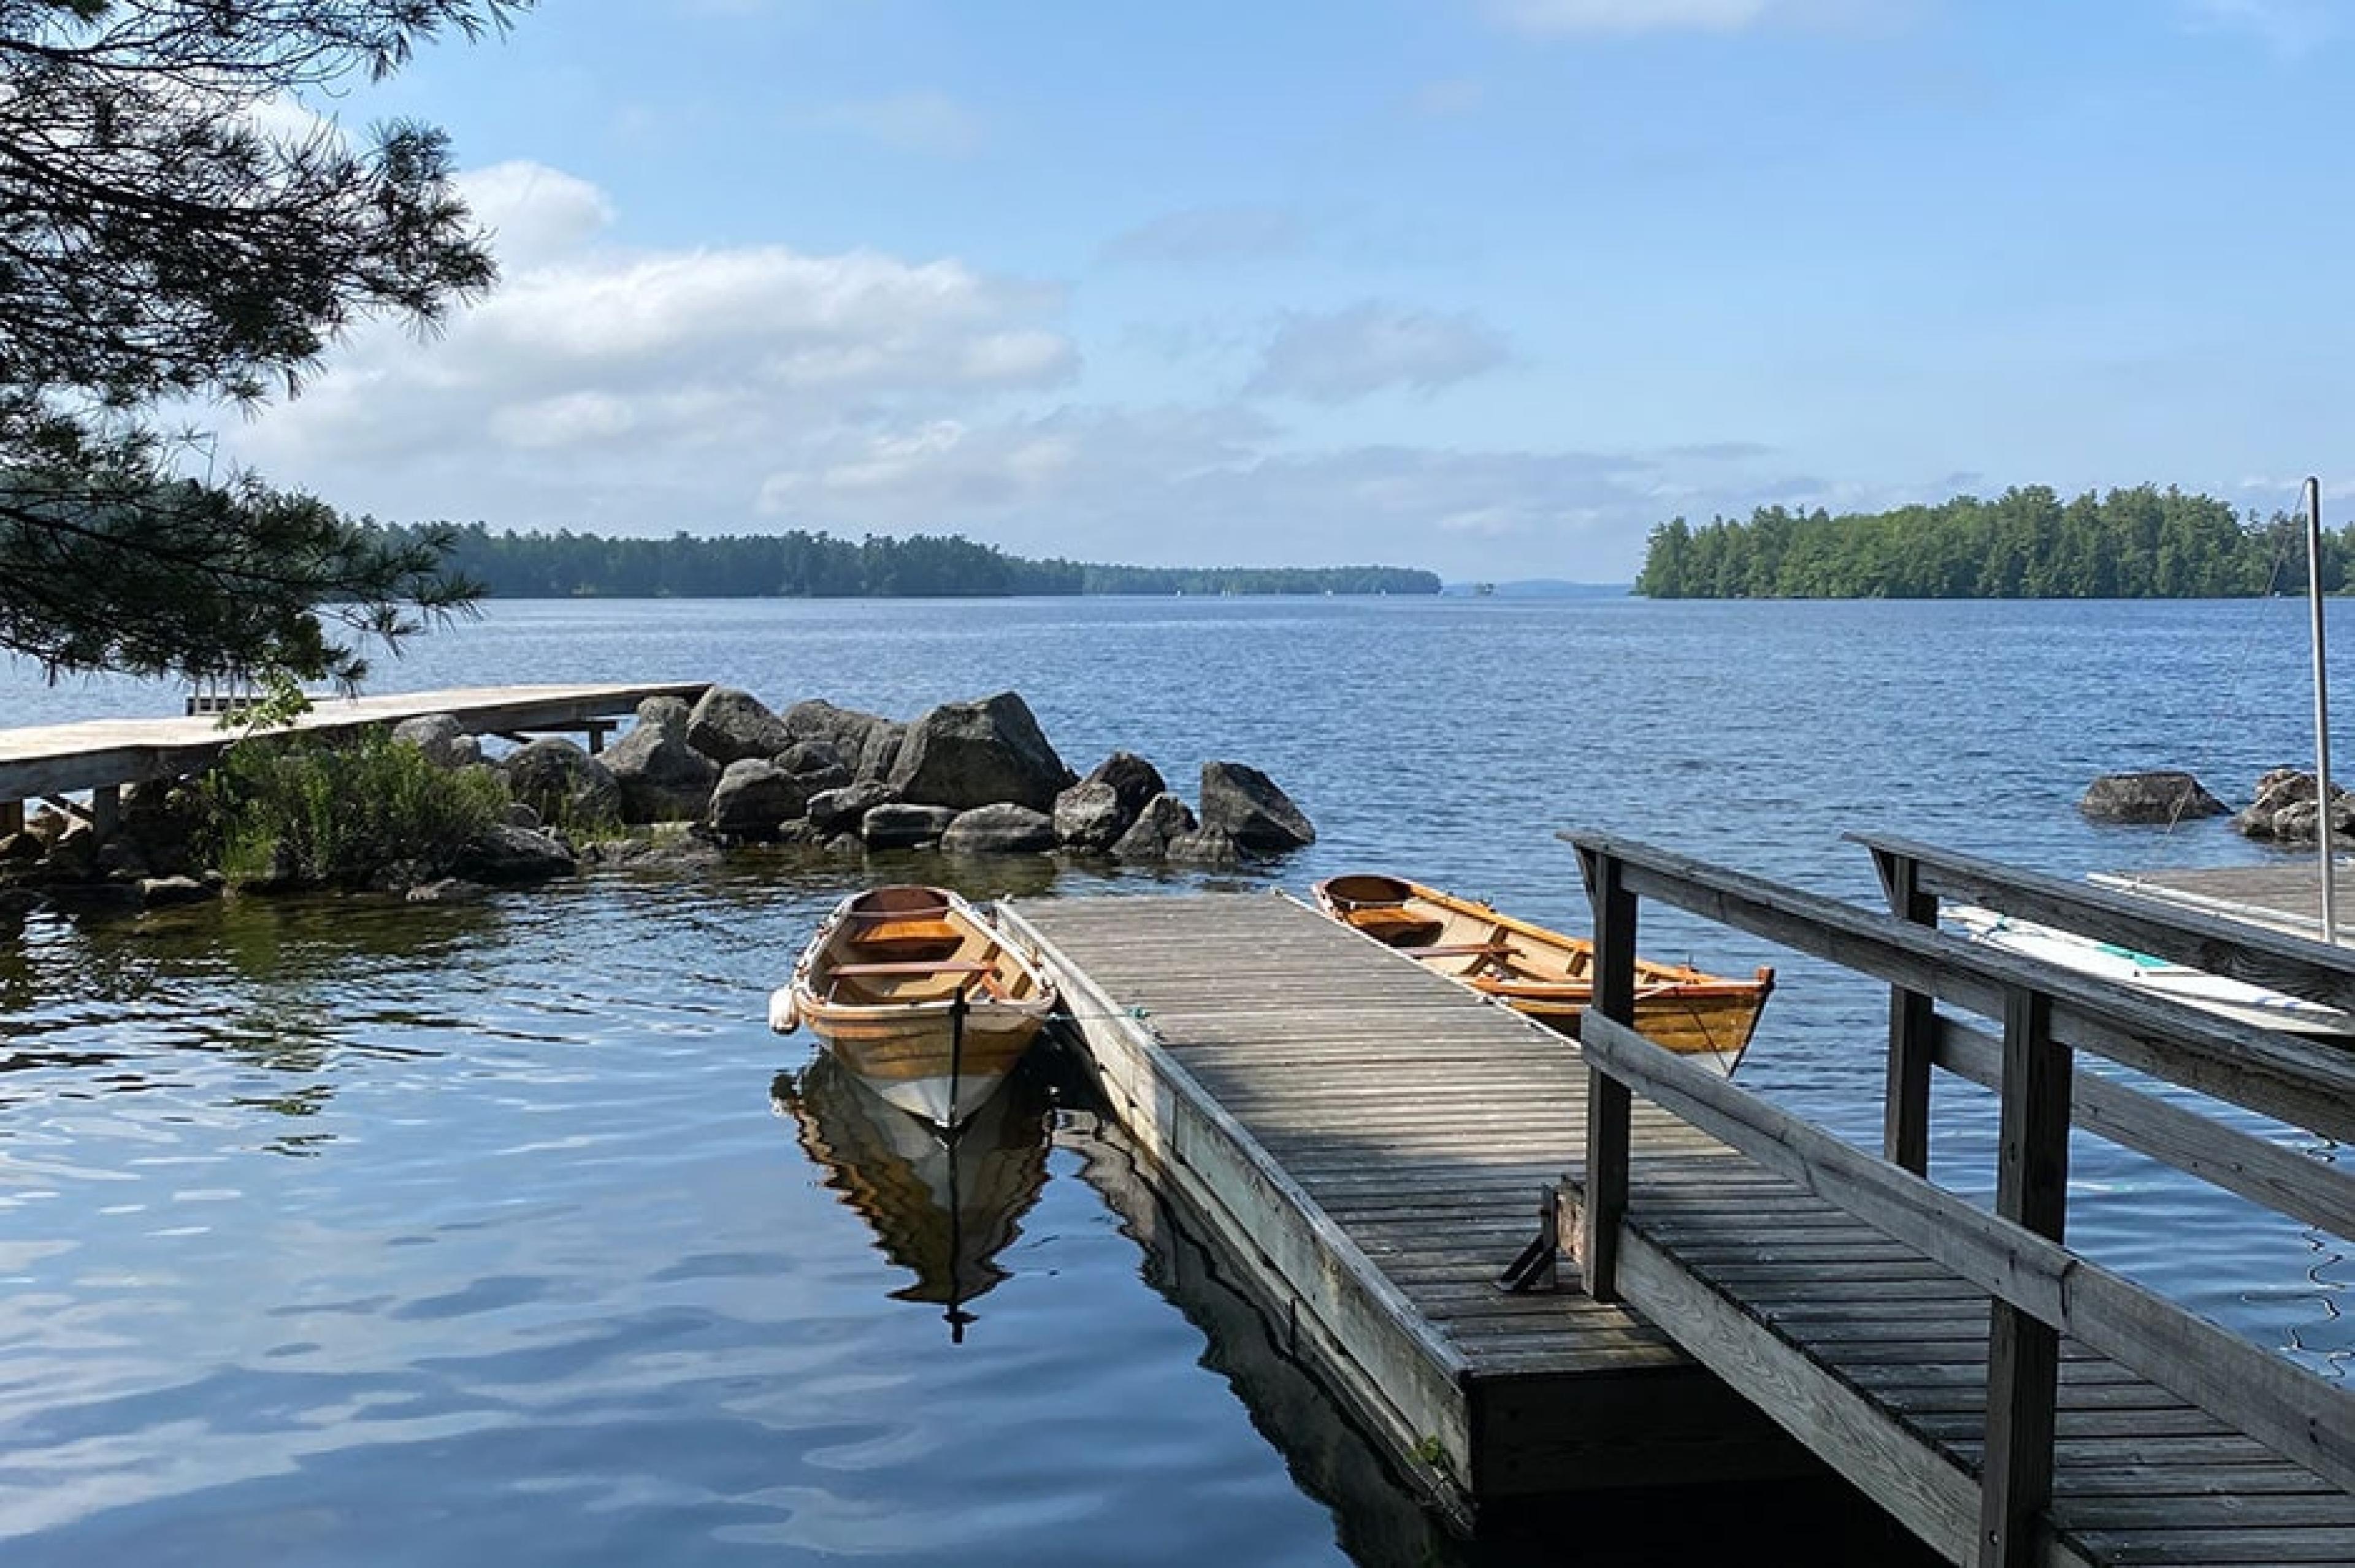 A morning view of boats on the water at Migis Lodge on Sebago Lake in Maine